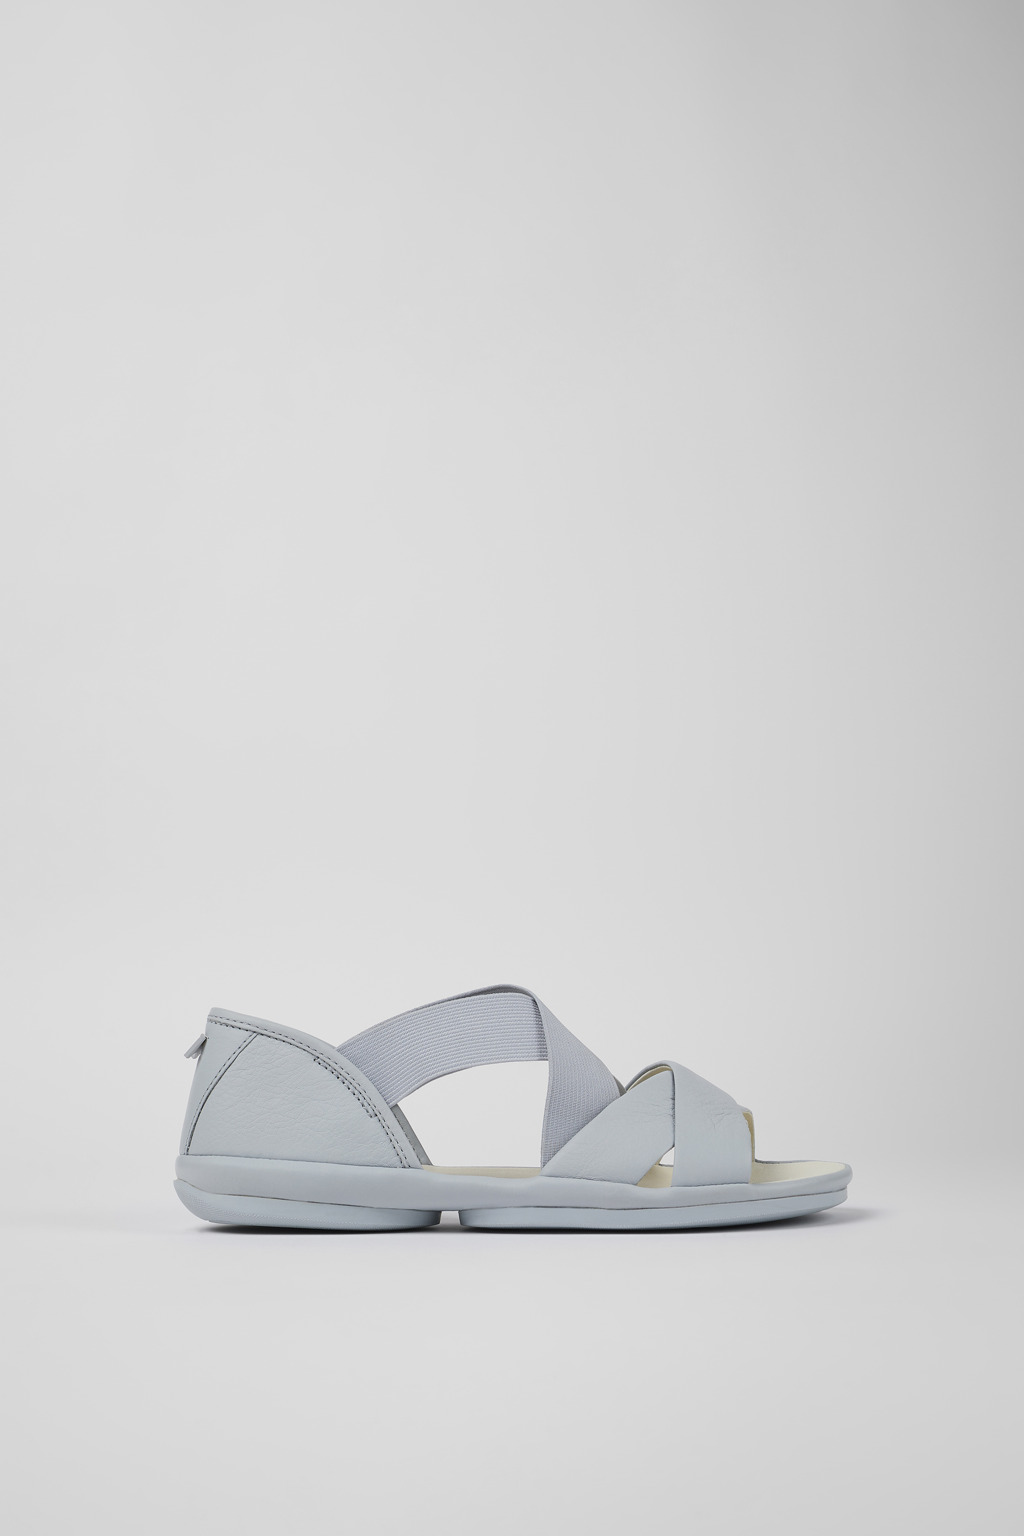 Right Grey Sandals for Women - Camper Shoes